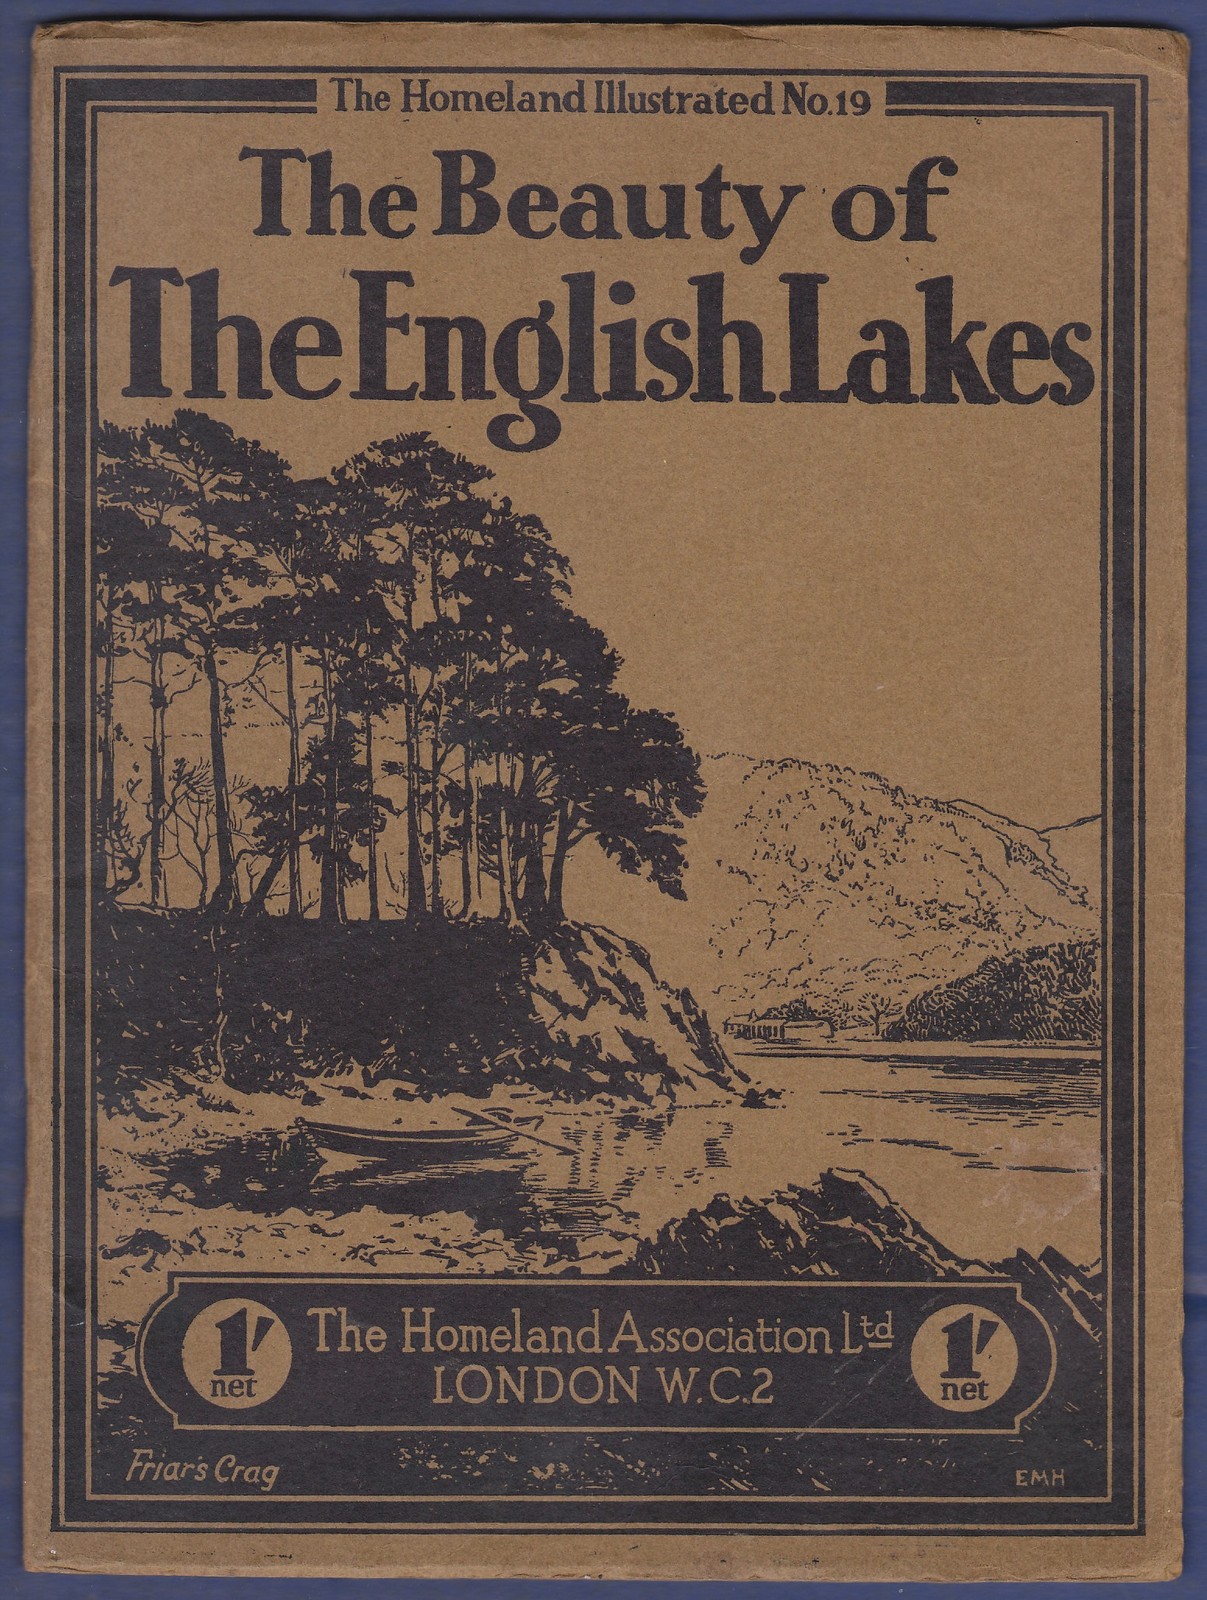 1930 - "The Beauty of The English Lakes"  by The Homeland Association.  Photos by G.R.Abraham